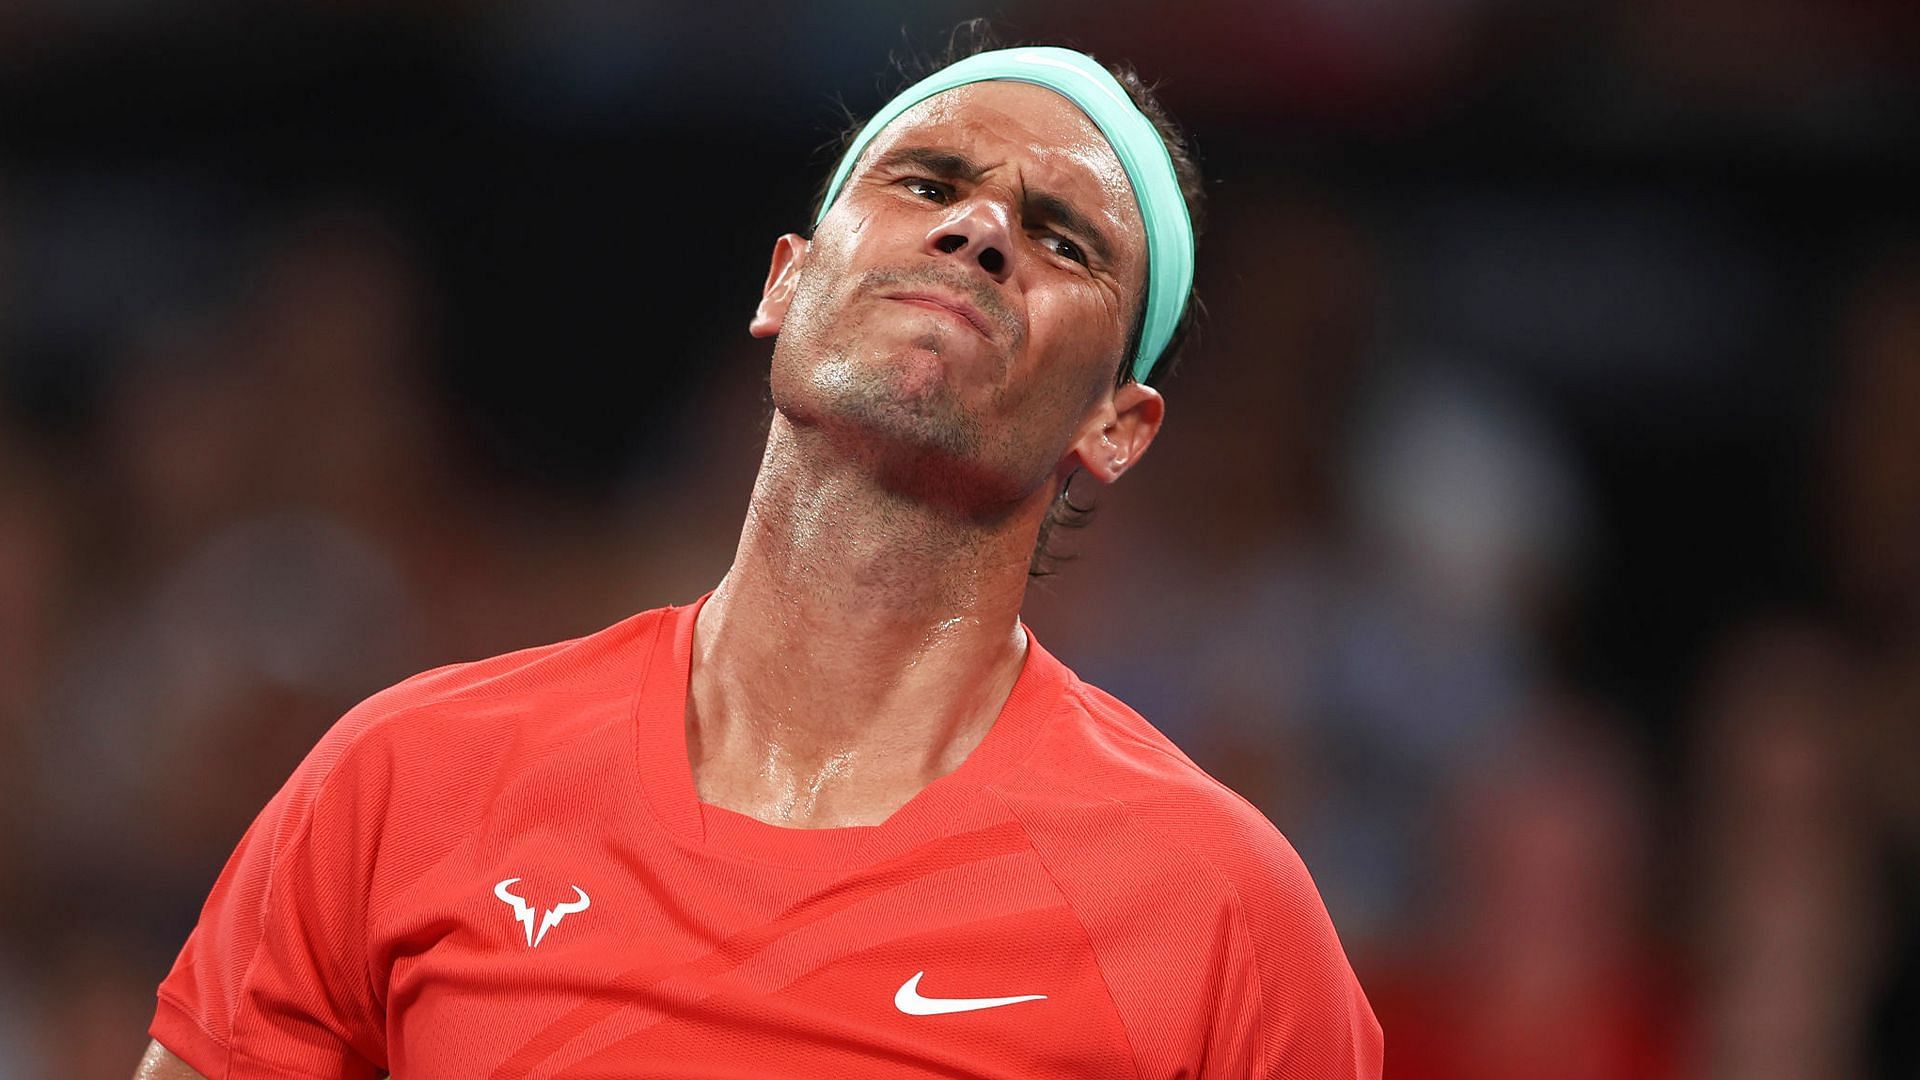 Rafael Nadal is out of the Australian Open.